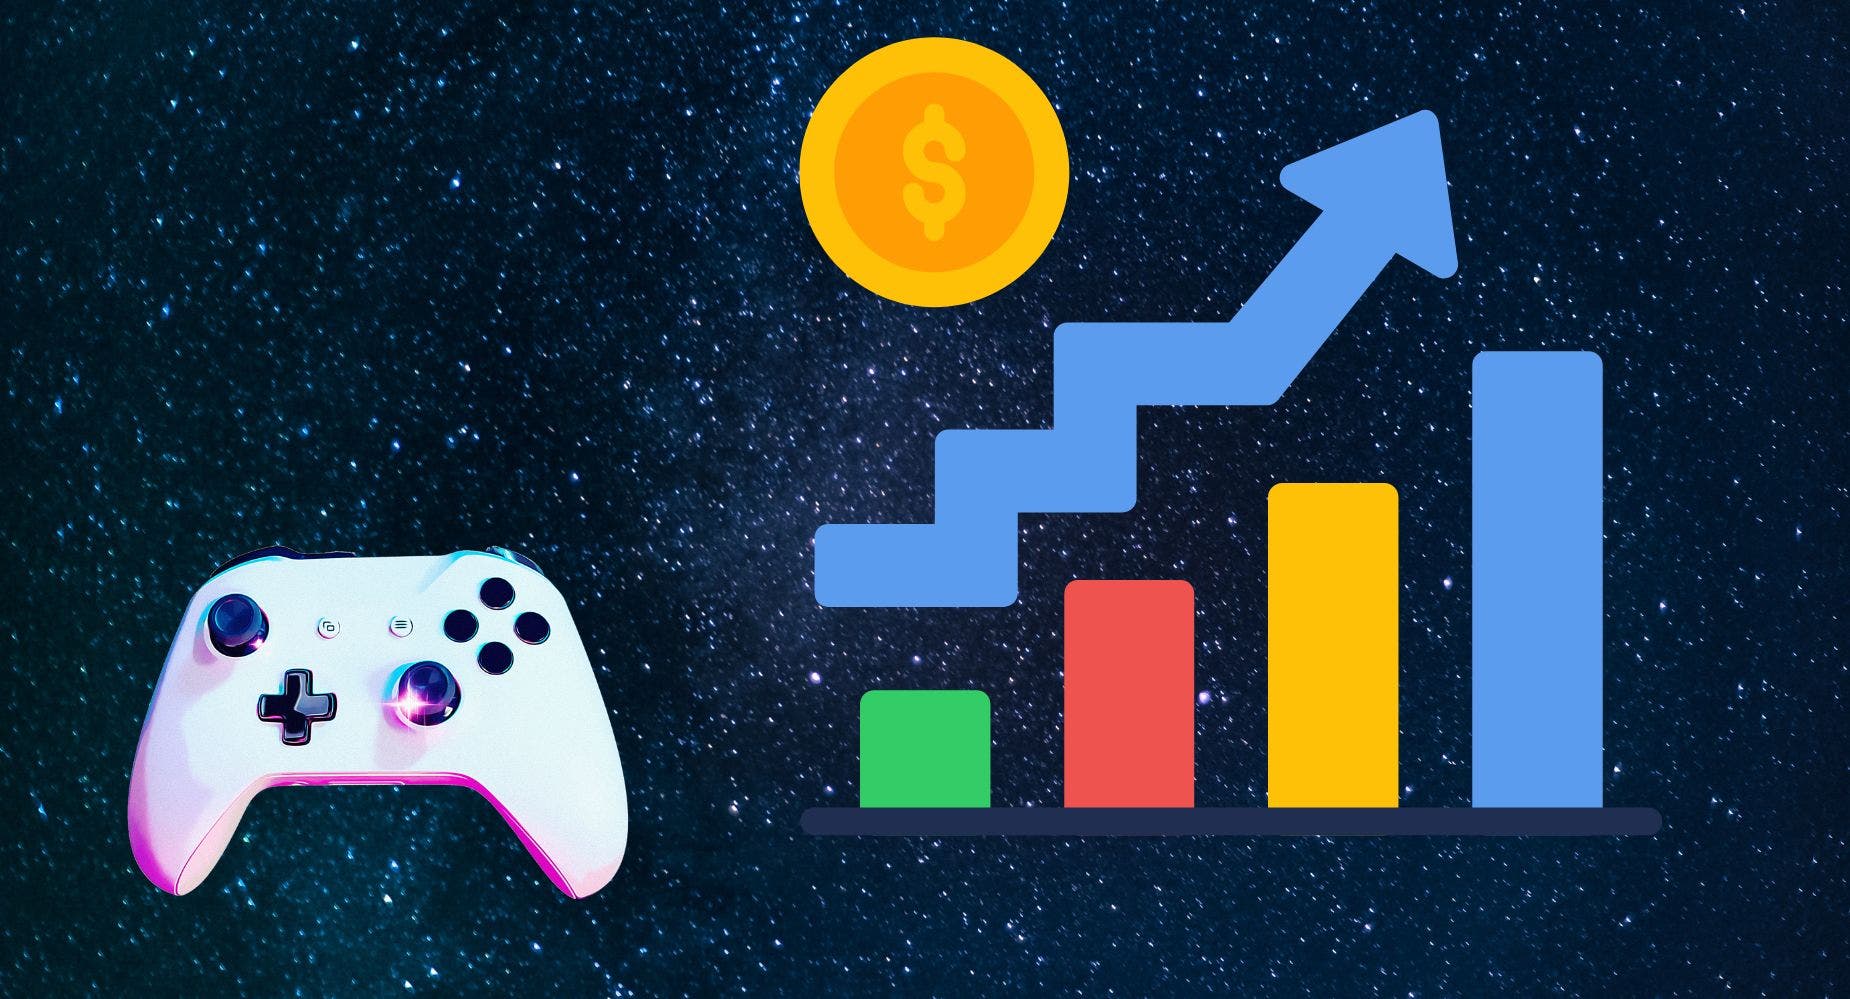 This Video Game Stock Has Outperformed Meta, Google, Apple, Amazon, Nvidia, Disney And Berkshire Hathaway